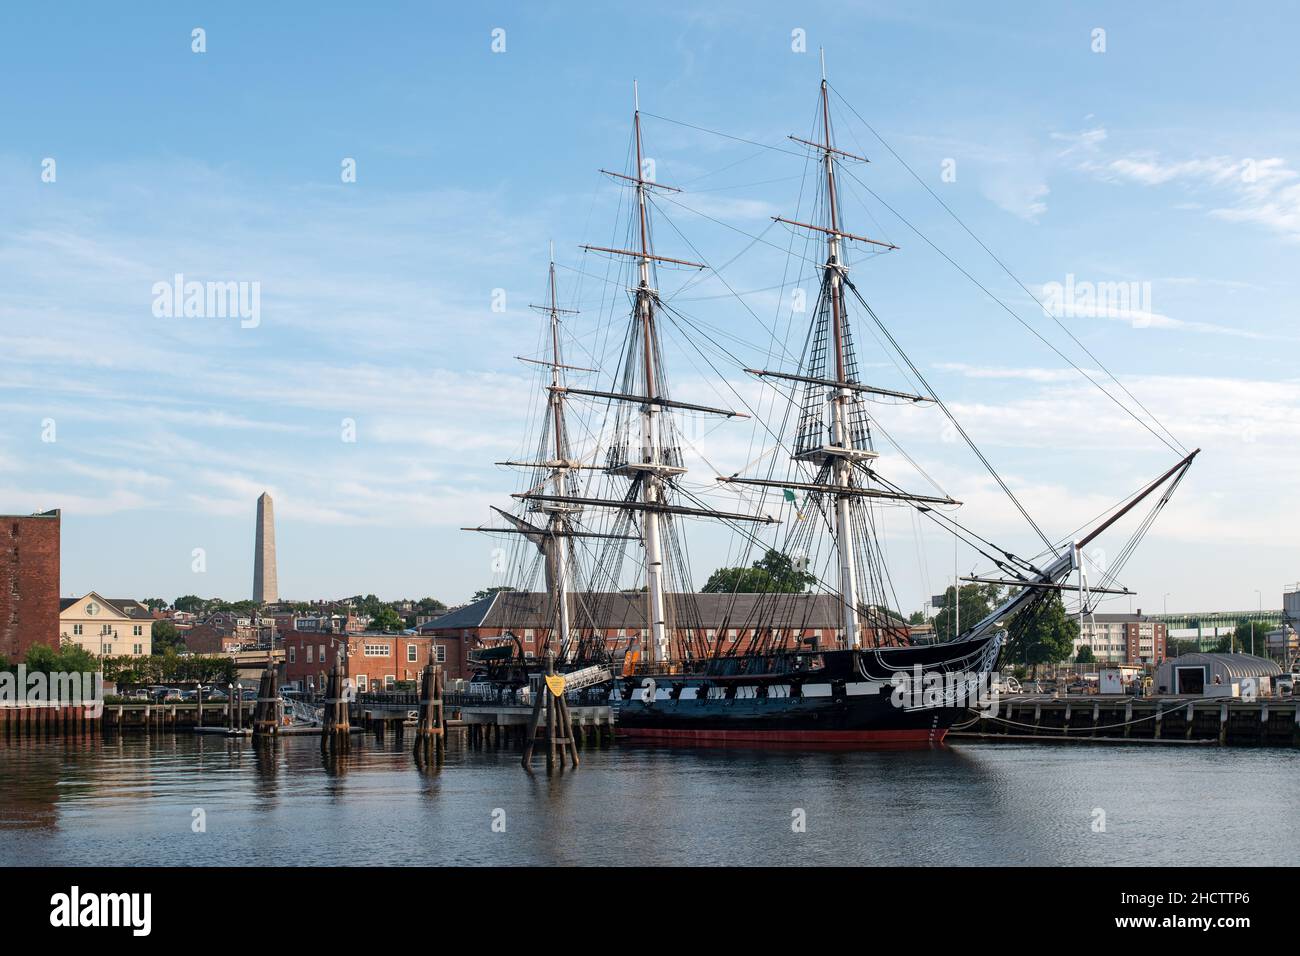 The Oldest ship afloat of any kind in the world, The USS Constitution, 'Old Ironsides' anchored in Charlestown, Massachusetts with the Bunker Hill Mon Stock Photo